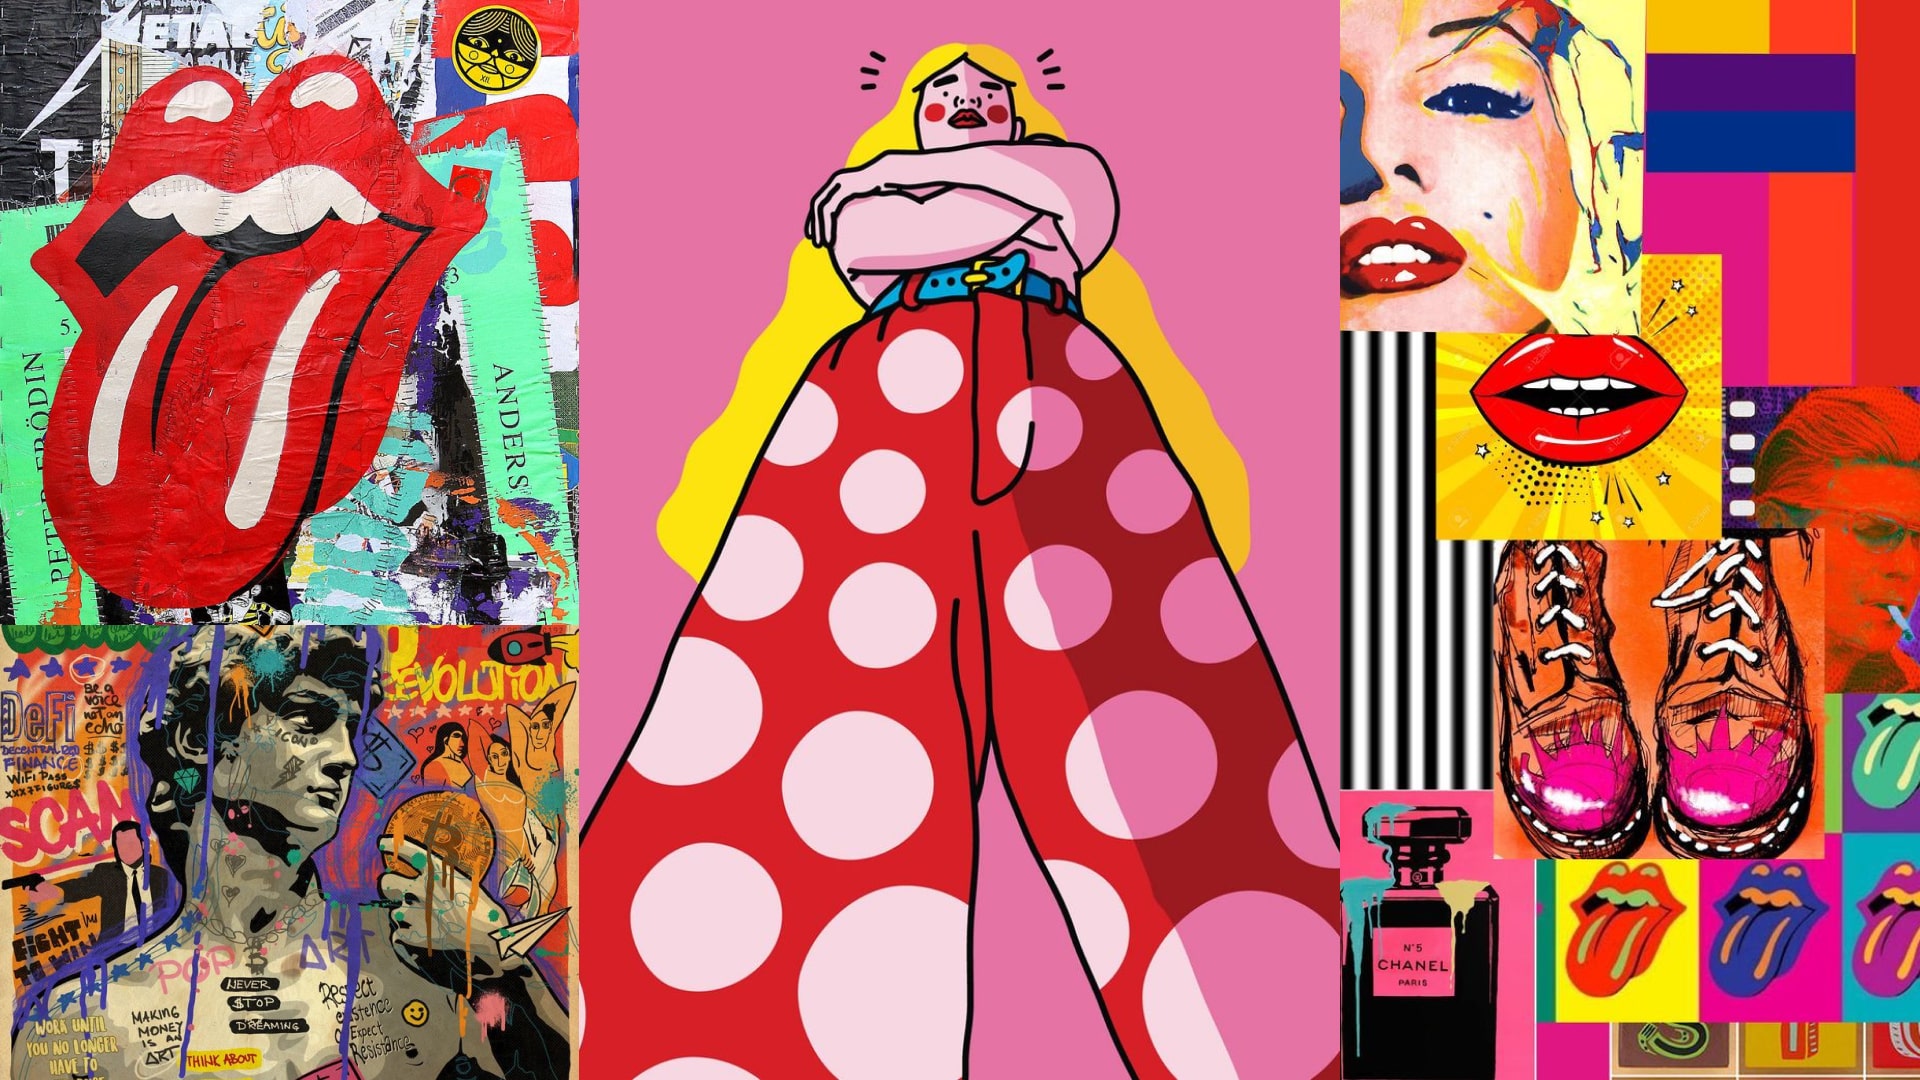 A collage art signifying different aspects of modern pop culture.